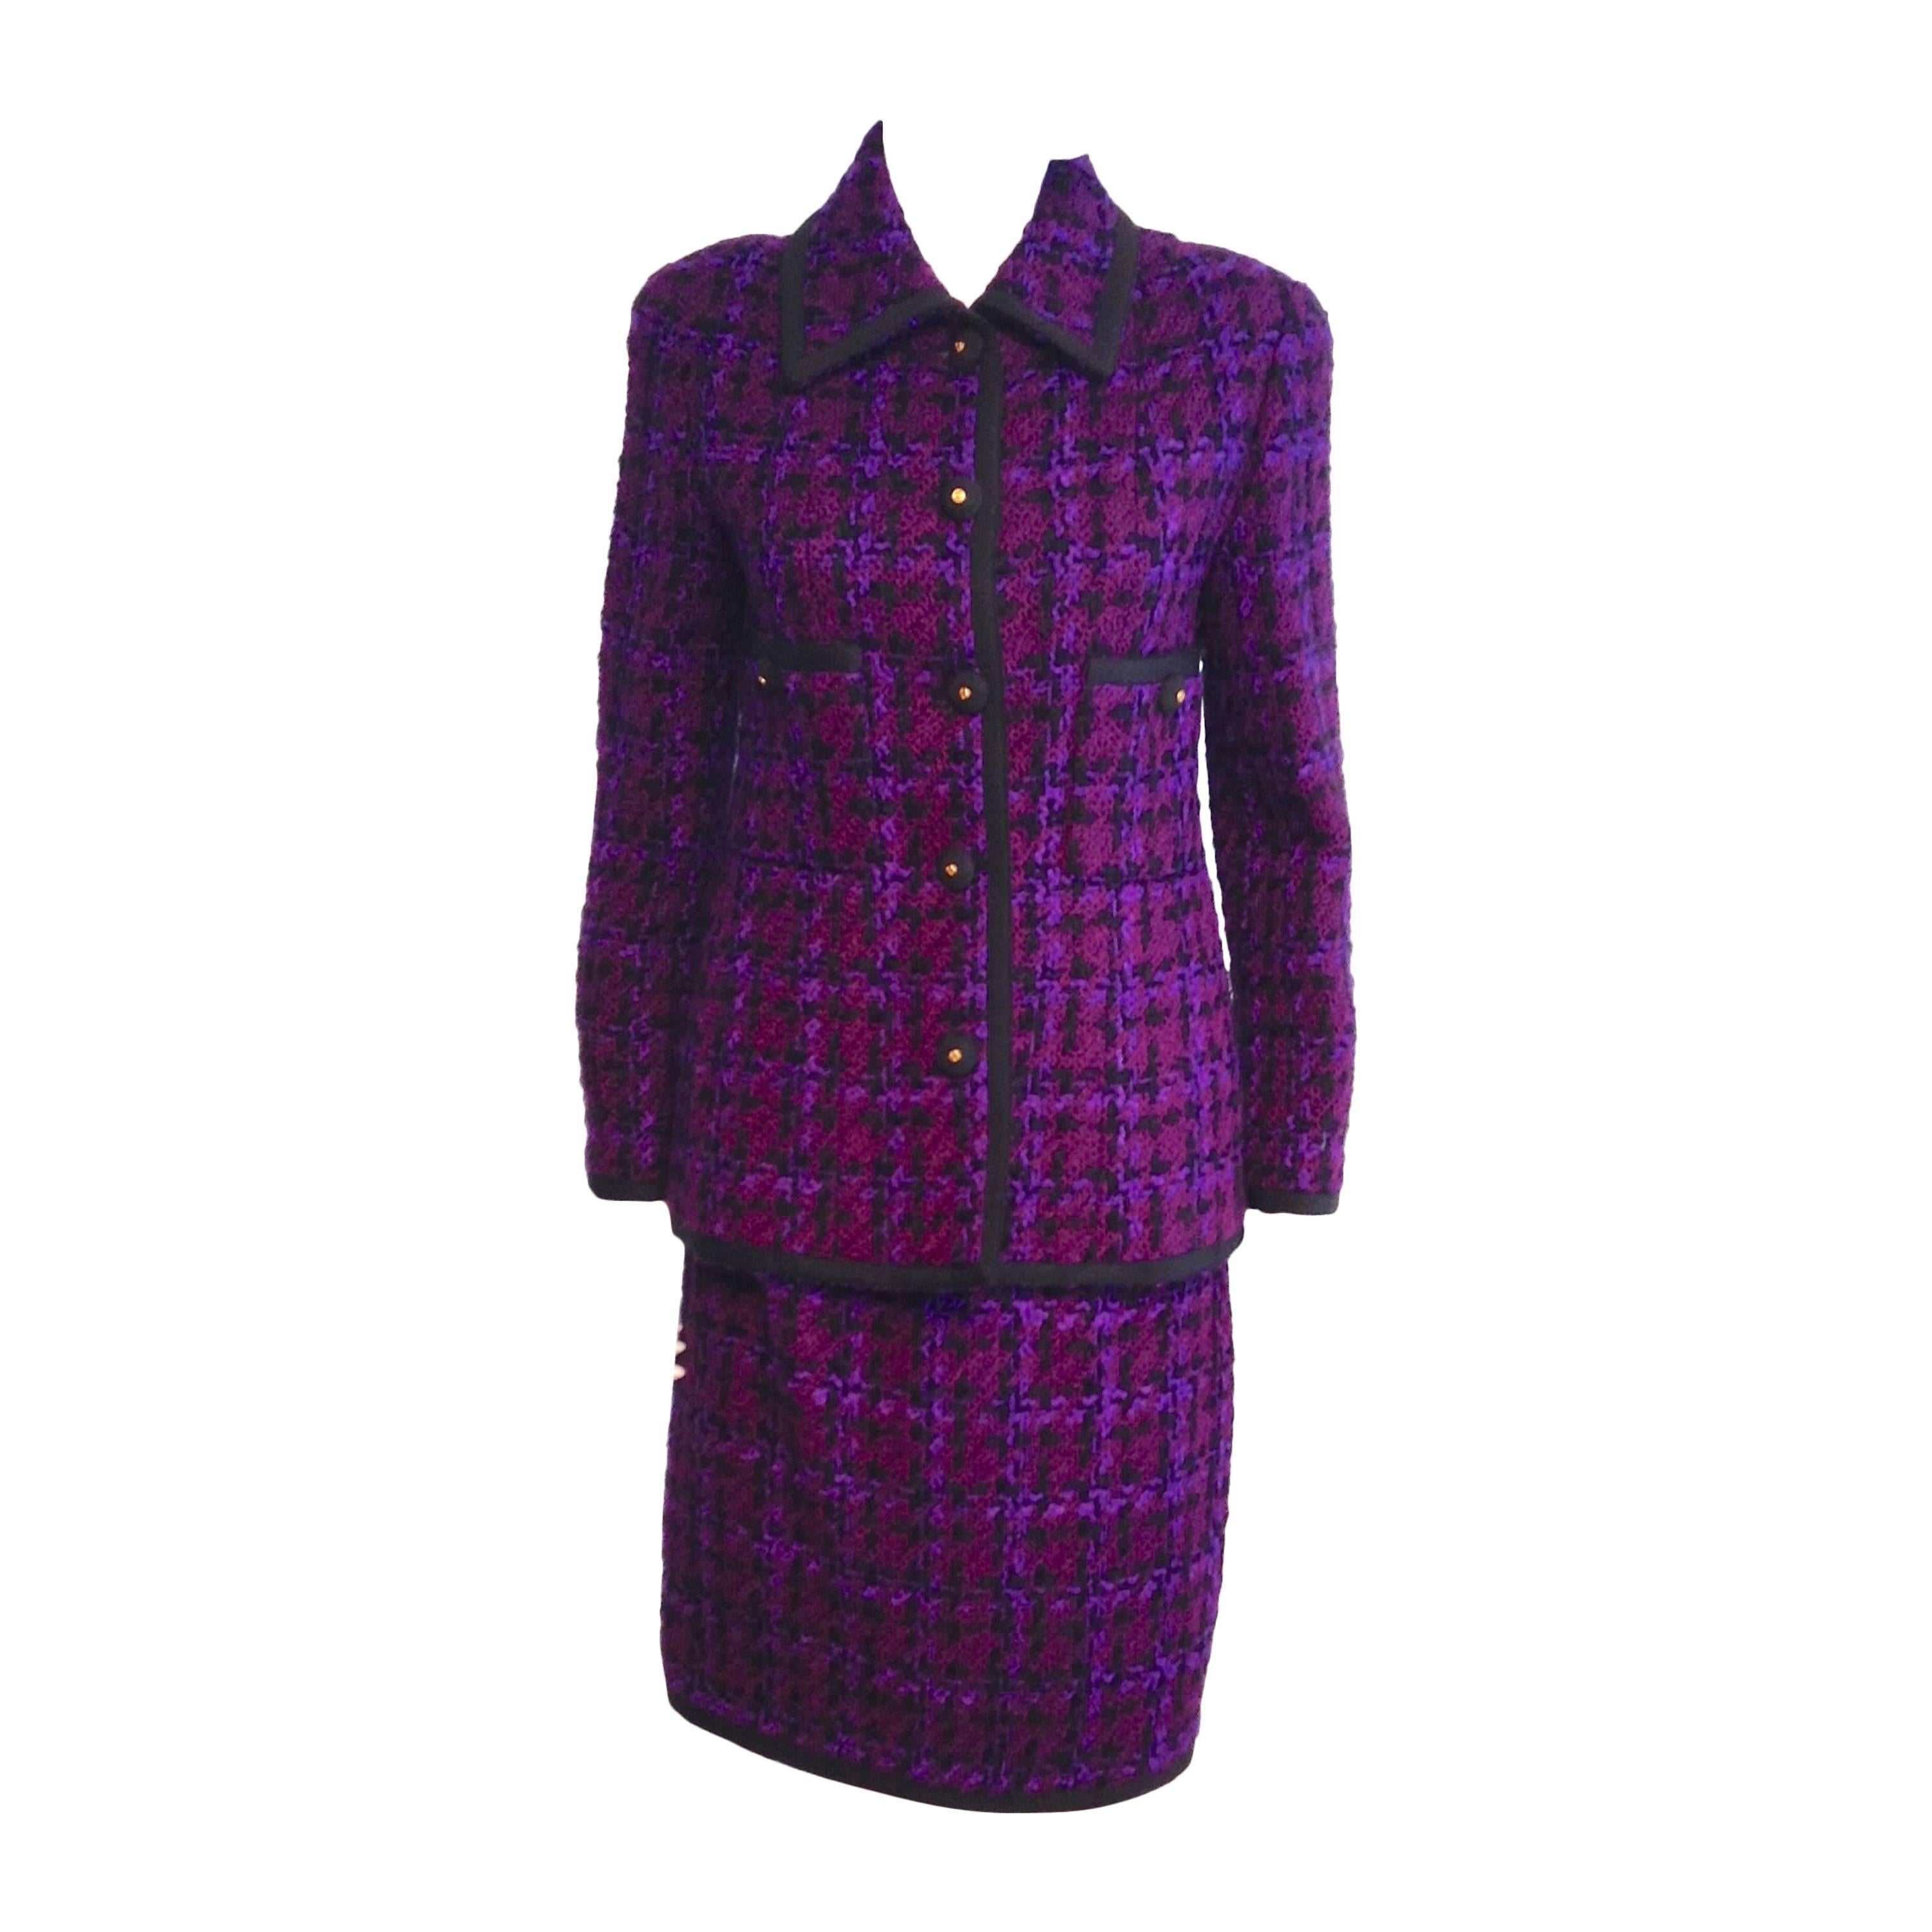 Chanel Purple Tweed Skirt Suit Size 38/4 For Sale